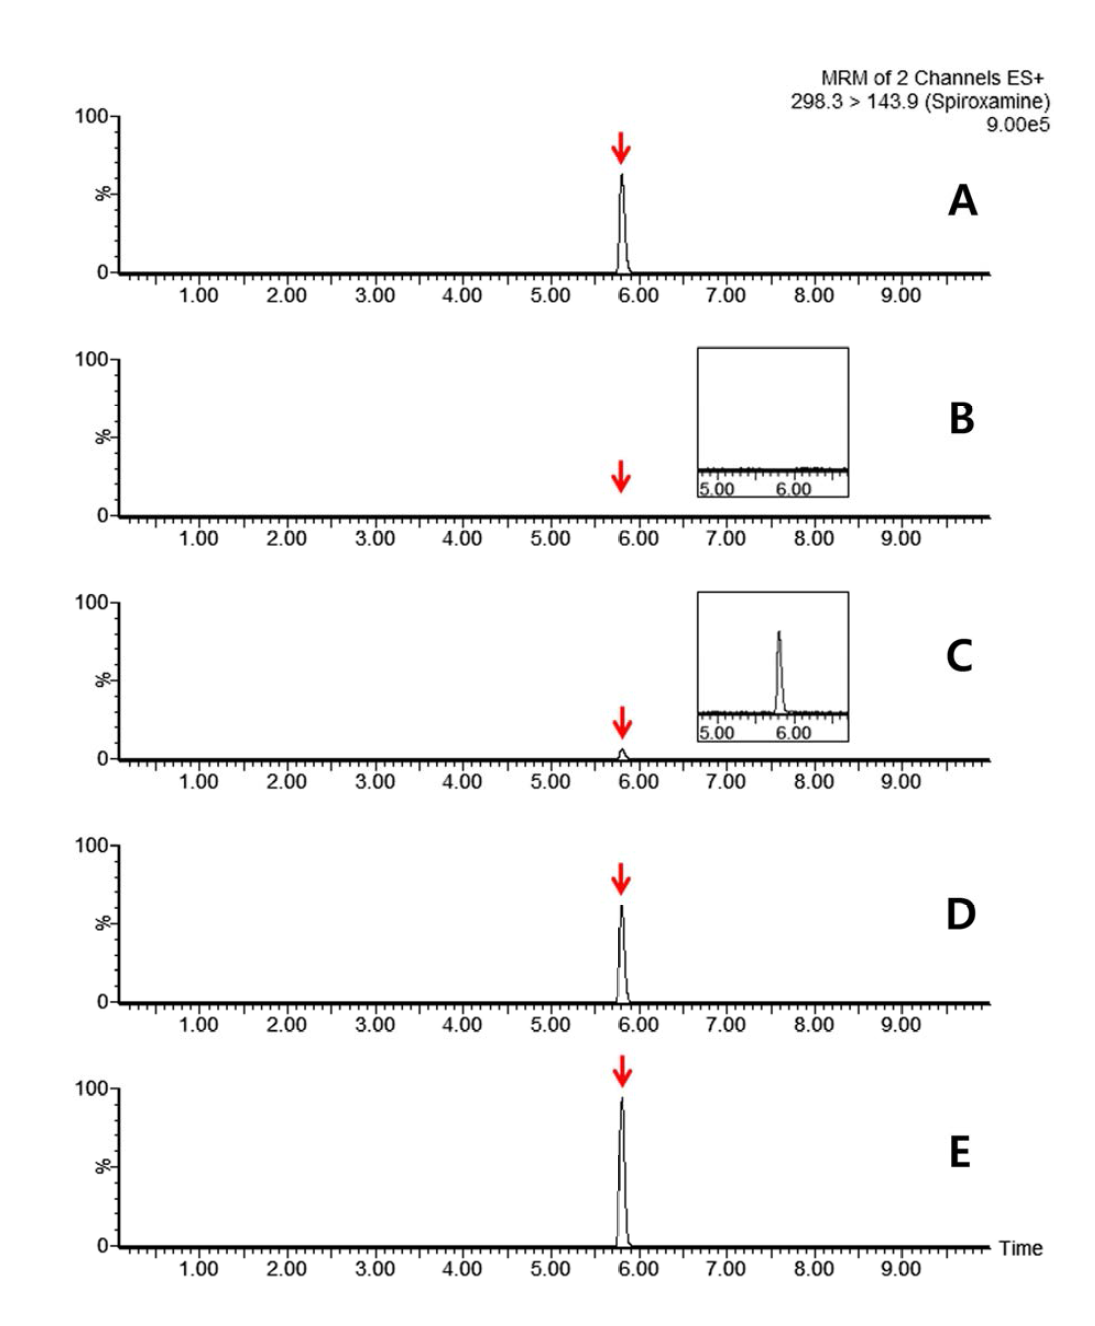 Representative MRM(quantification ion) chromatograms of spiroxamine corresponding to: (A) standard solution at 0.01 mg/kg, (B) hulled rice control, (C) spiked at 0.001 mg/kg, (D) spiked at 0.01 mg/kg and (E) spiked at 0.05 mg/kg